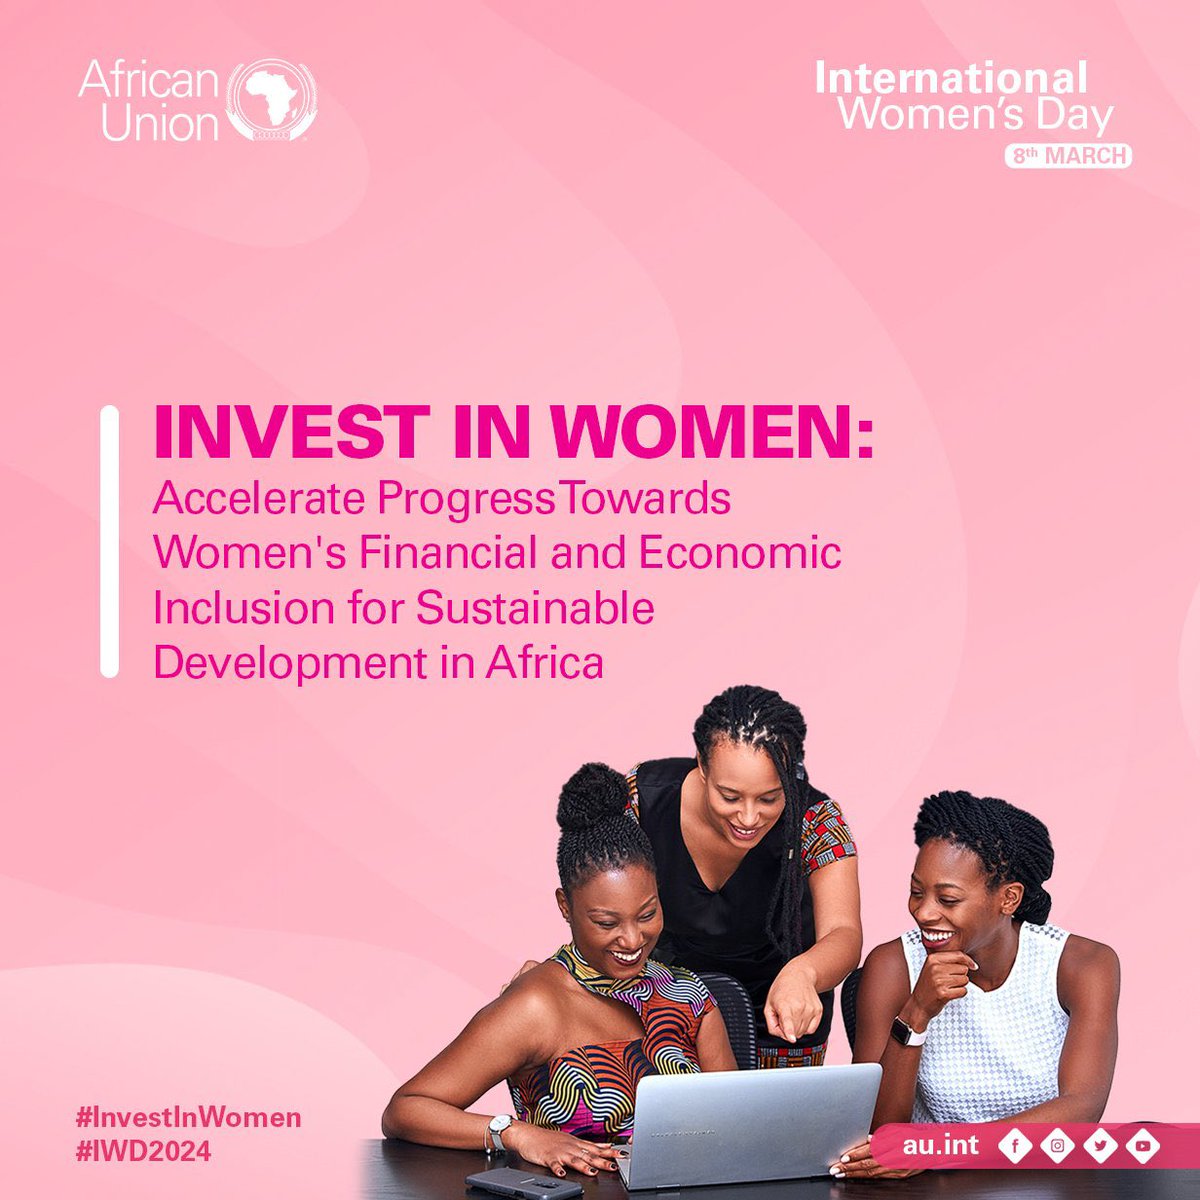 #Gender_equality is both a fundamental human right & a powerful engine of economic development. Closing that gap could help double our economic growth, improve society & provide our girls w/ role models #IWD24 @au_ied @AU_WGYD @_AfricanUnion